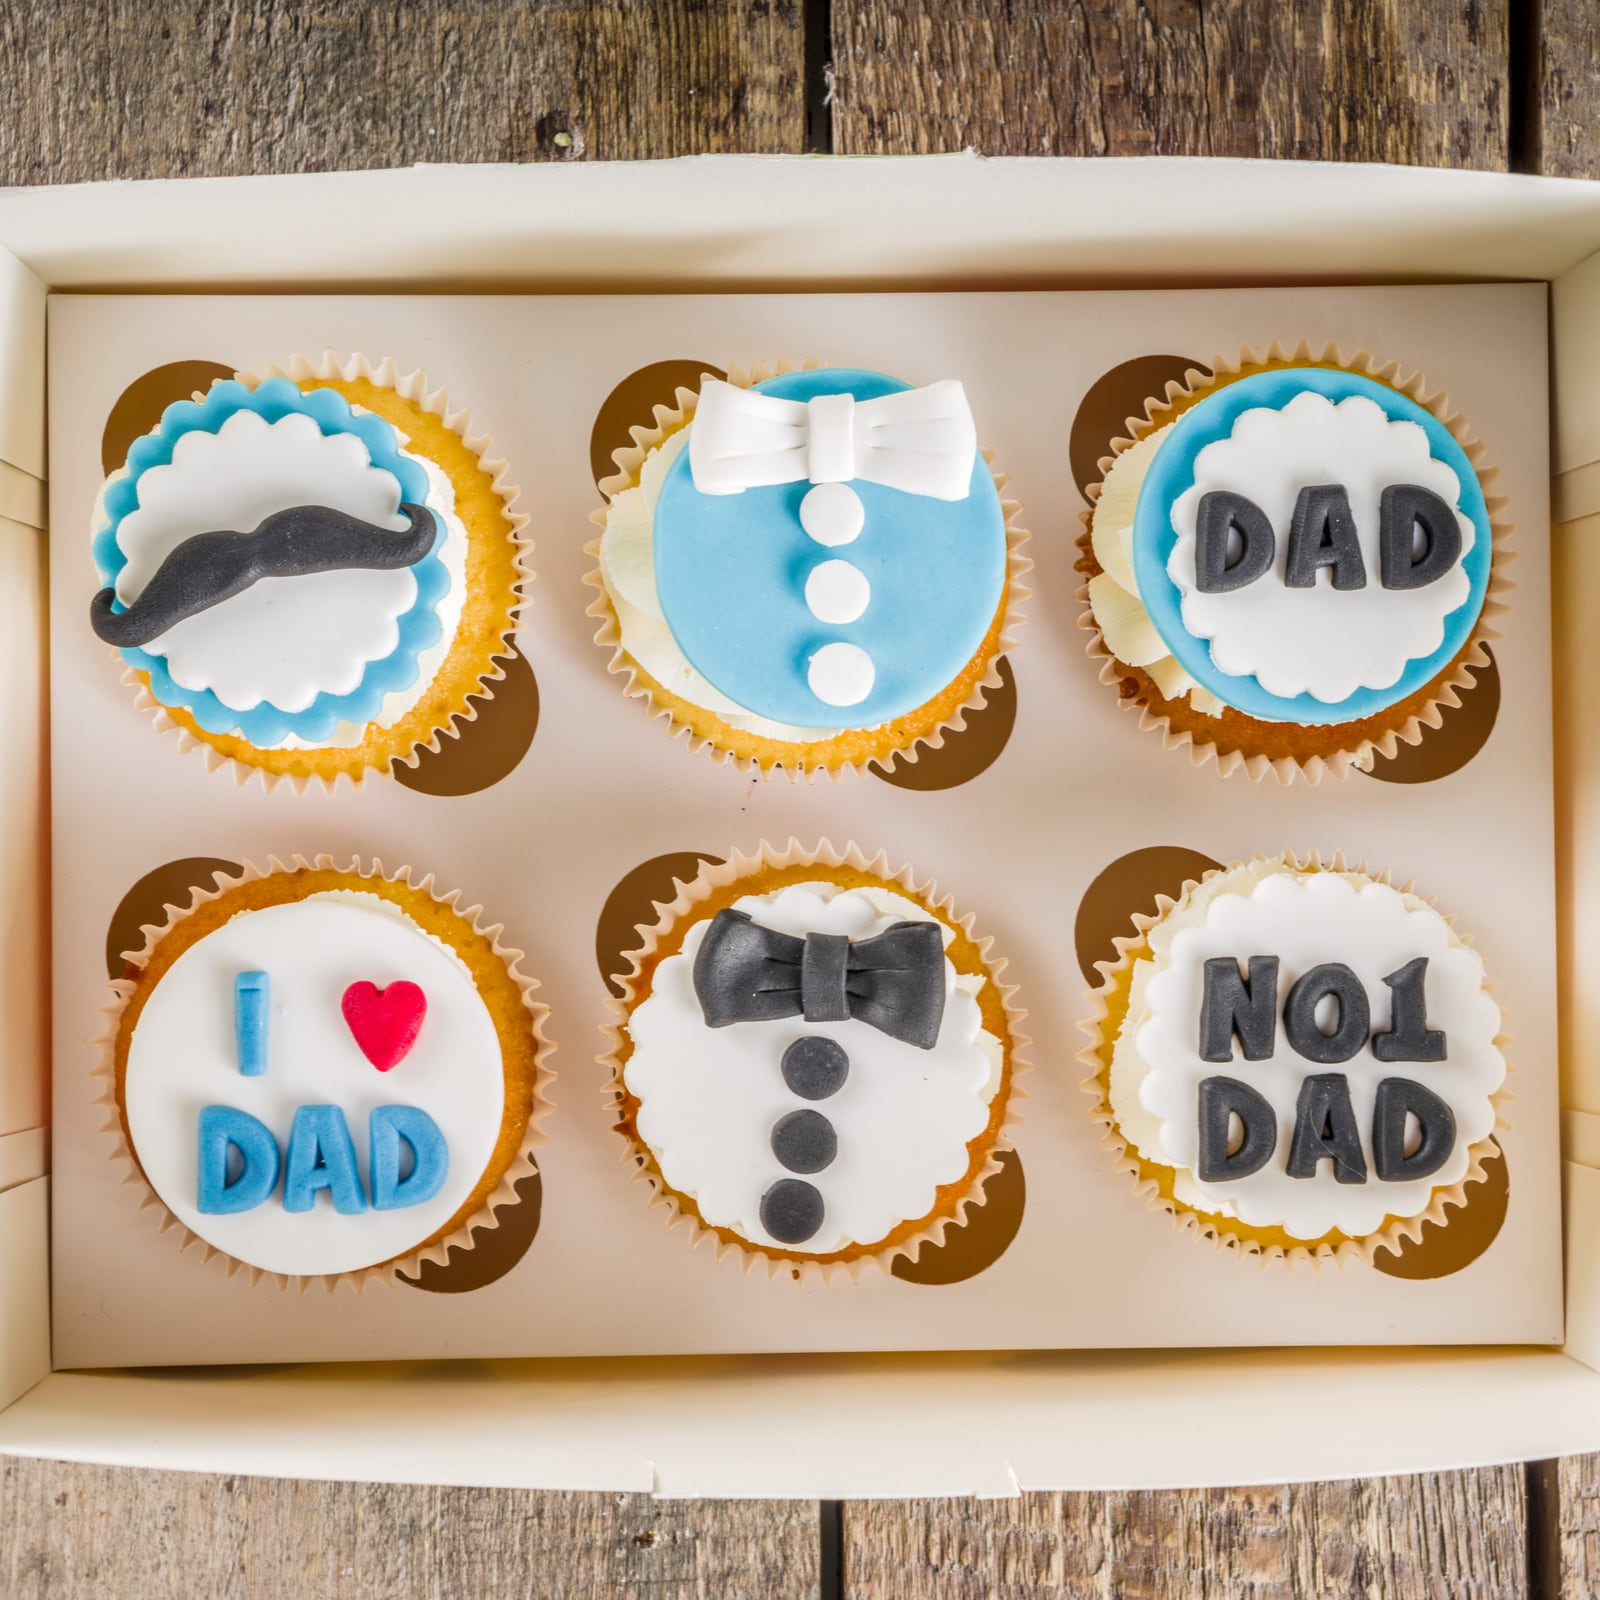 Book Best Father's Day Cakes Online to Surprise Your Dad in Jaipur